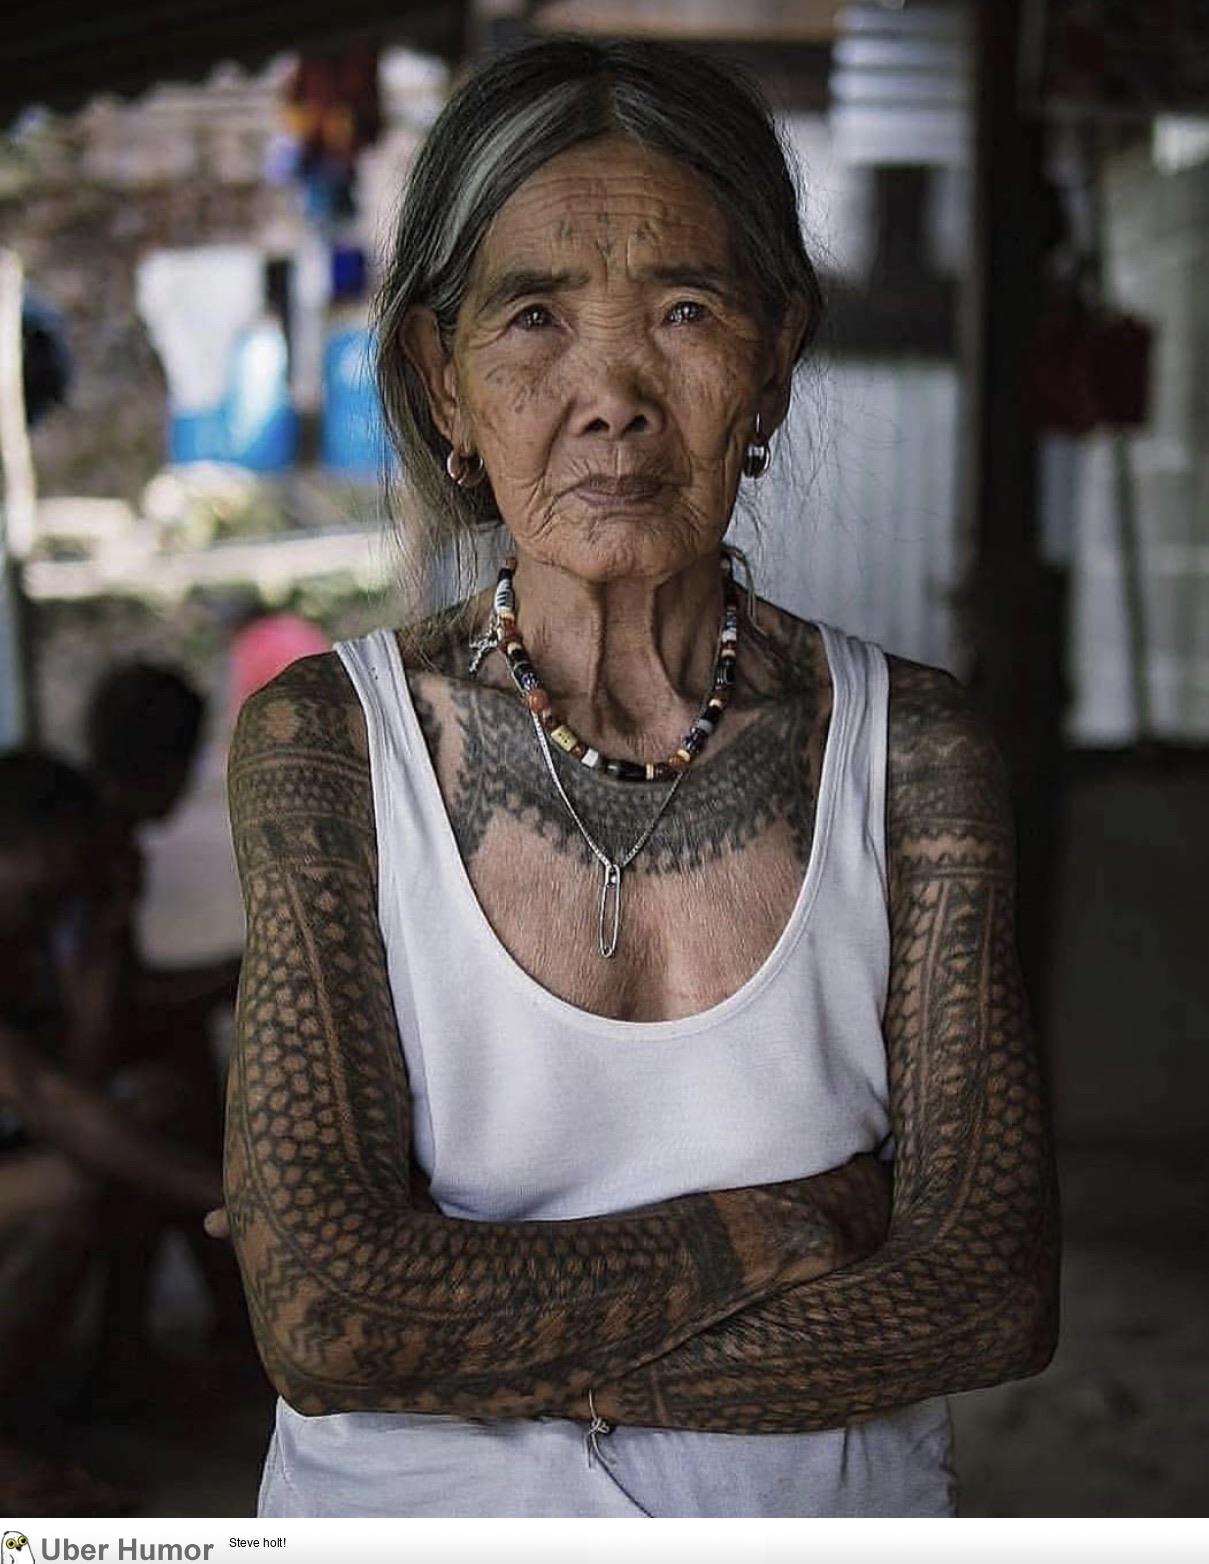 What will those tattoos look like when you're old?' Well, mom, hopefully as  badass as this 102 year old woman. | Funny Pictures, Quotes, Pics, Photos,  Images. Videos of Really Very Cute